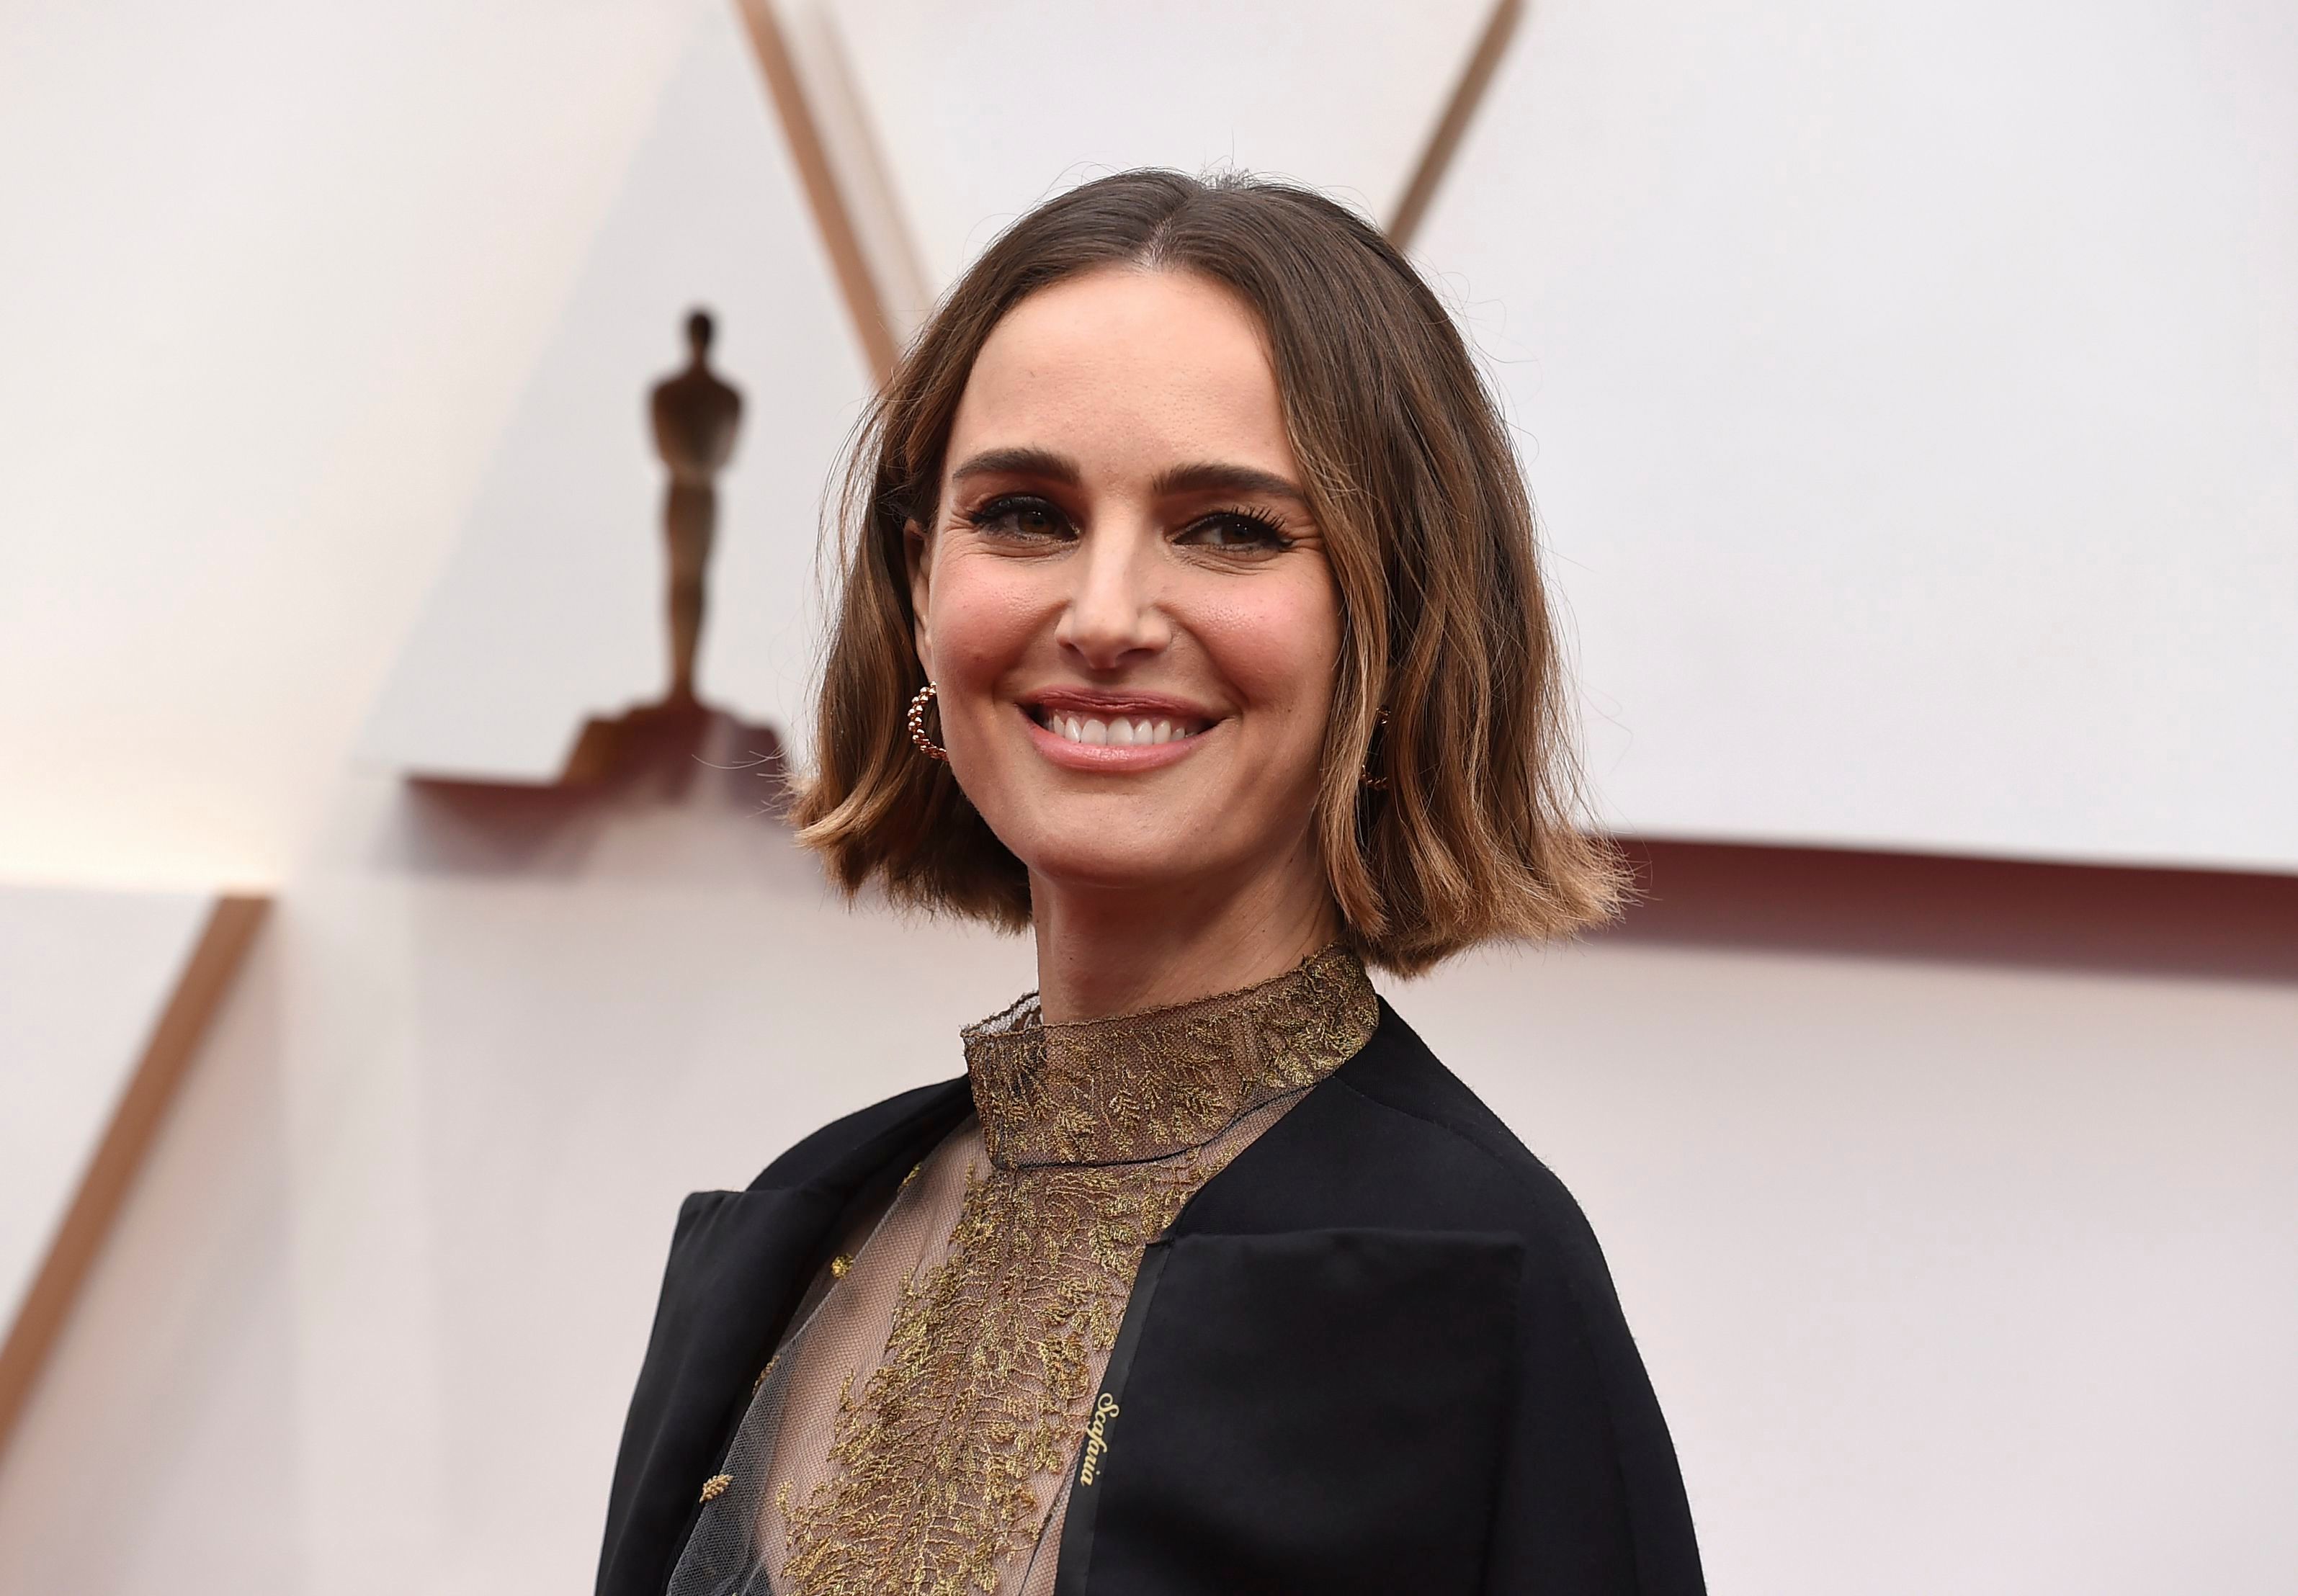 Natalie Portman arrives at the Oscars, at the Dolby Theatre in Los Angeles92nd Academy Awards - Arrivals, Los Angeles, USA - 09 Feb 2020